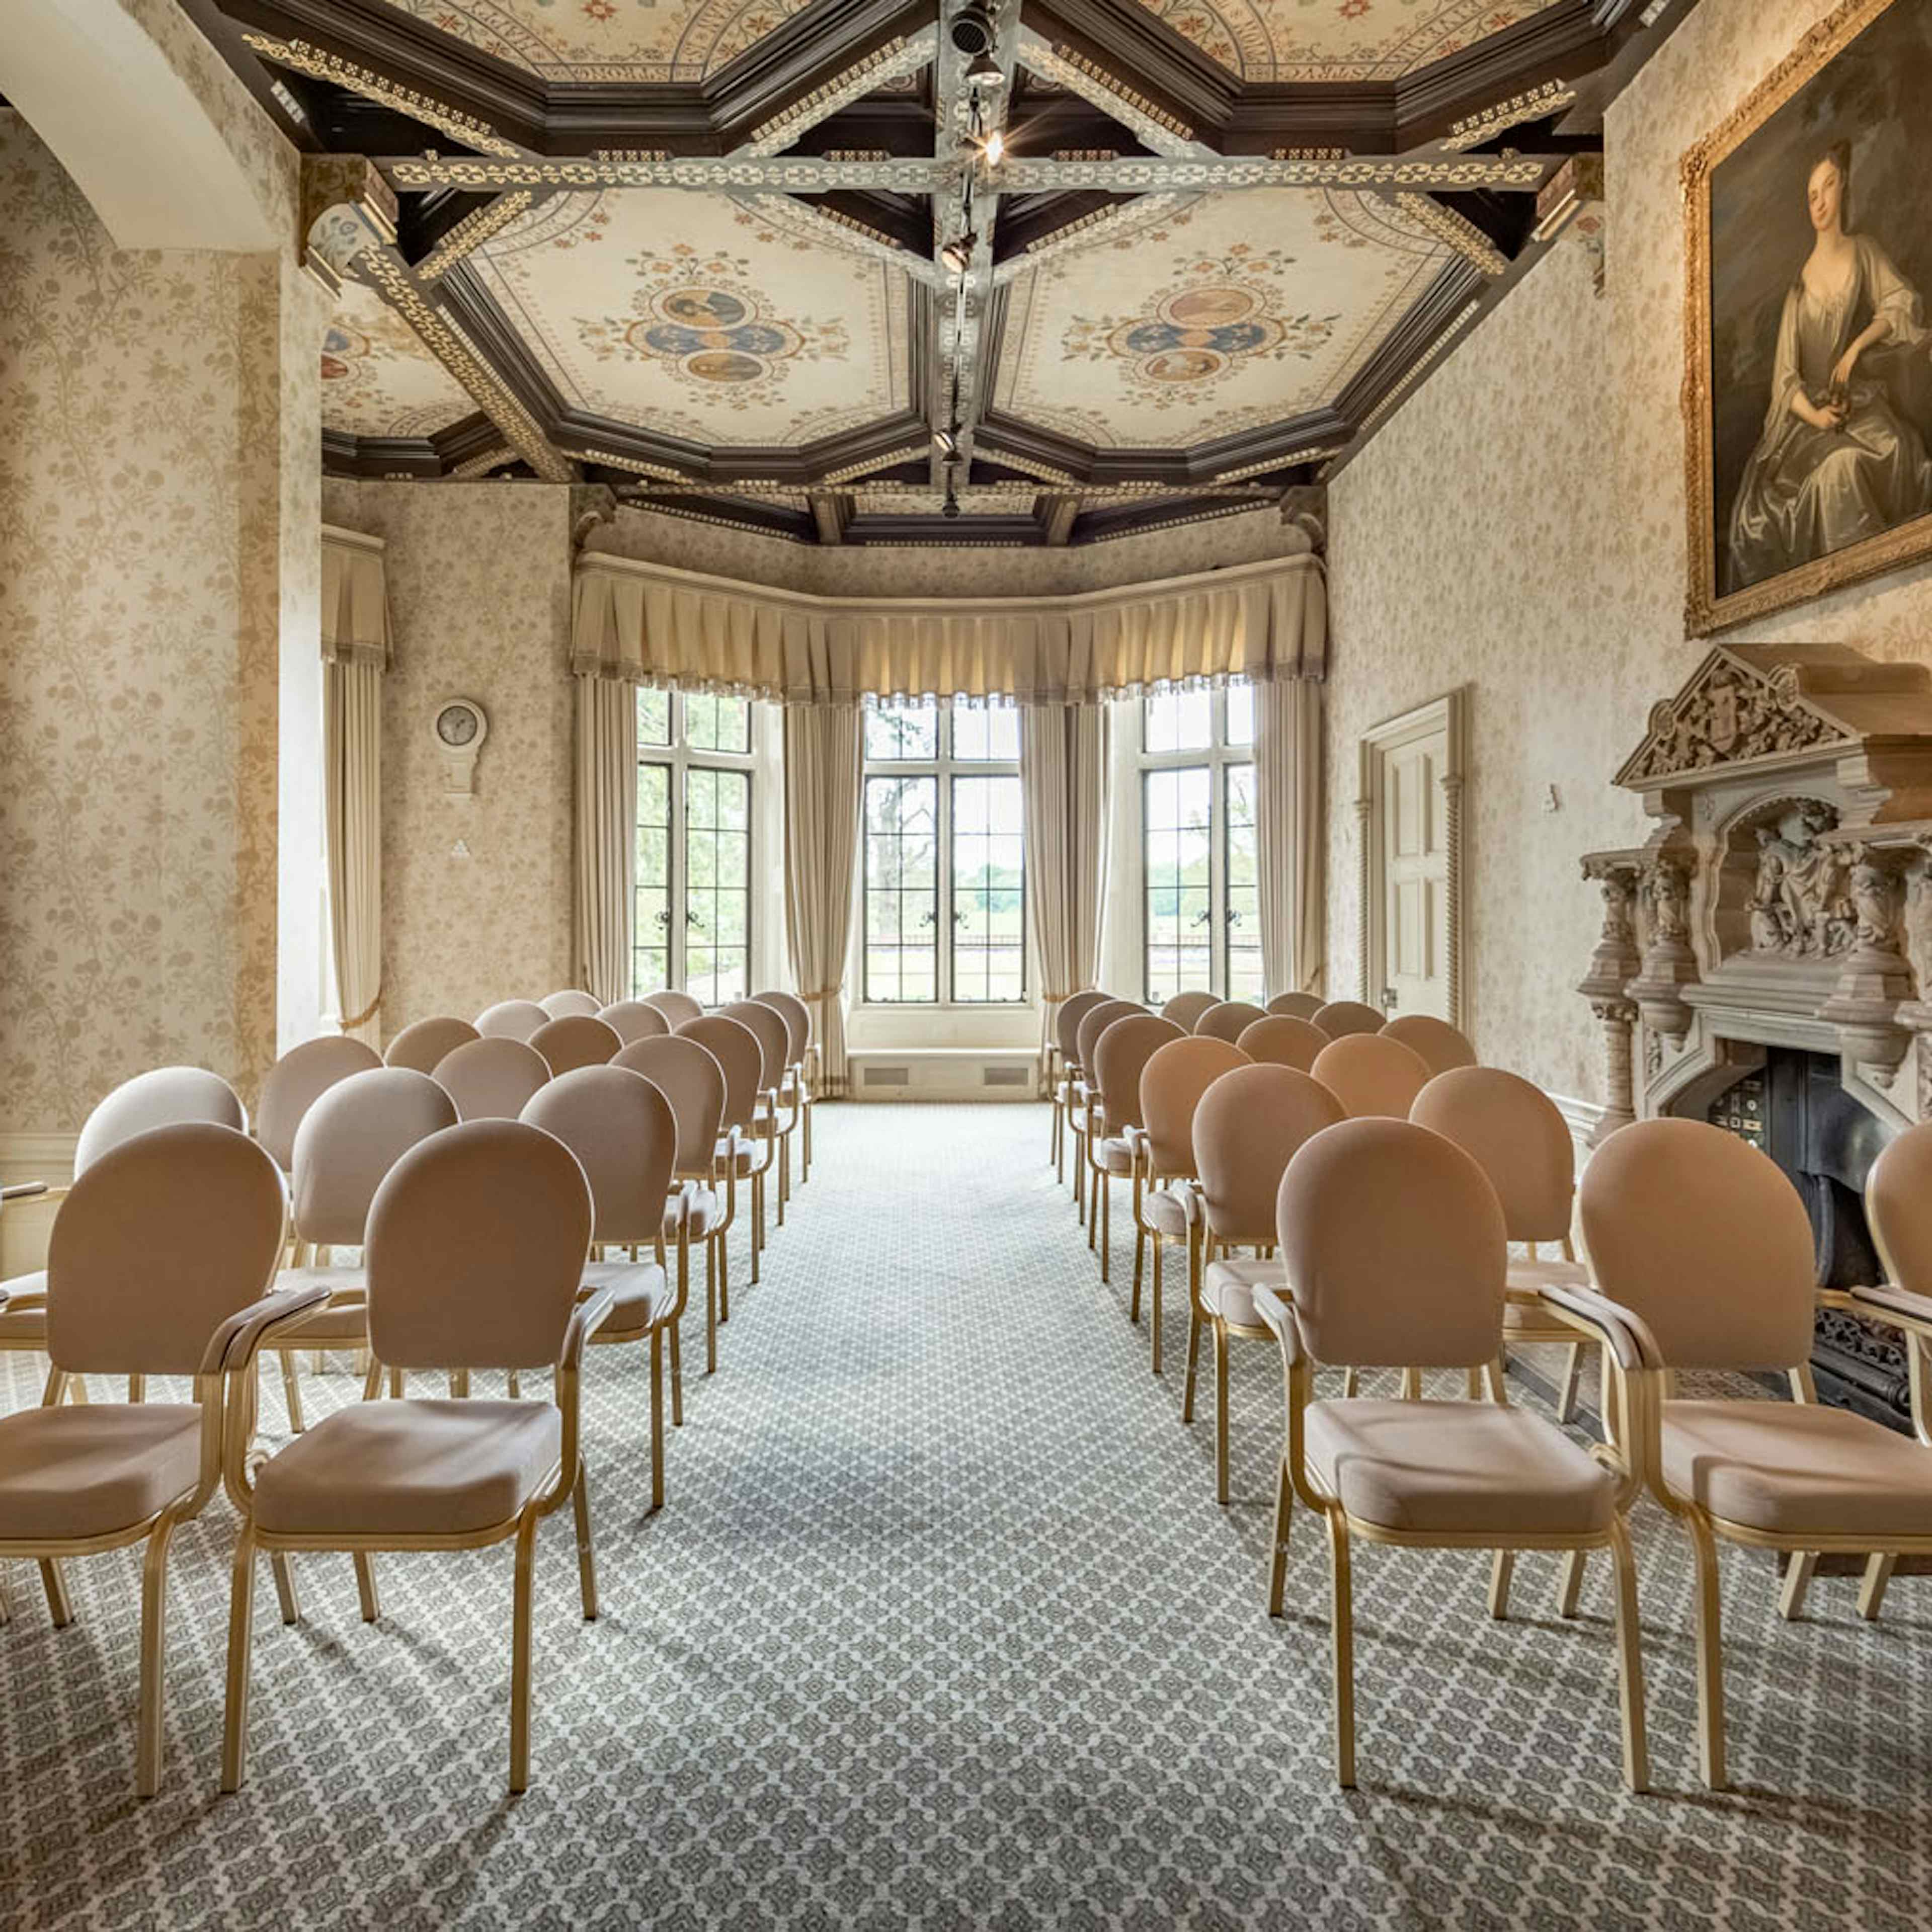 The Elvetham, Hampshire  - The Morning Room image 2